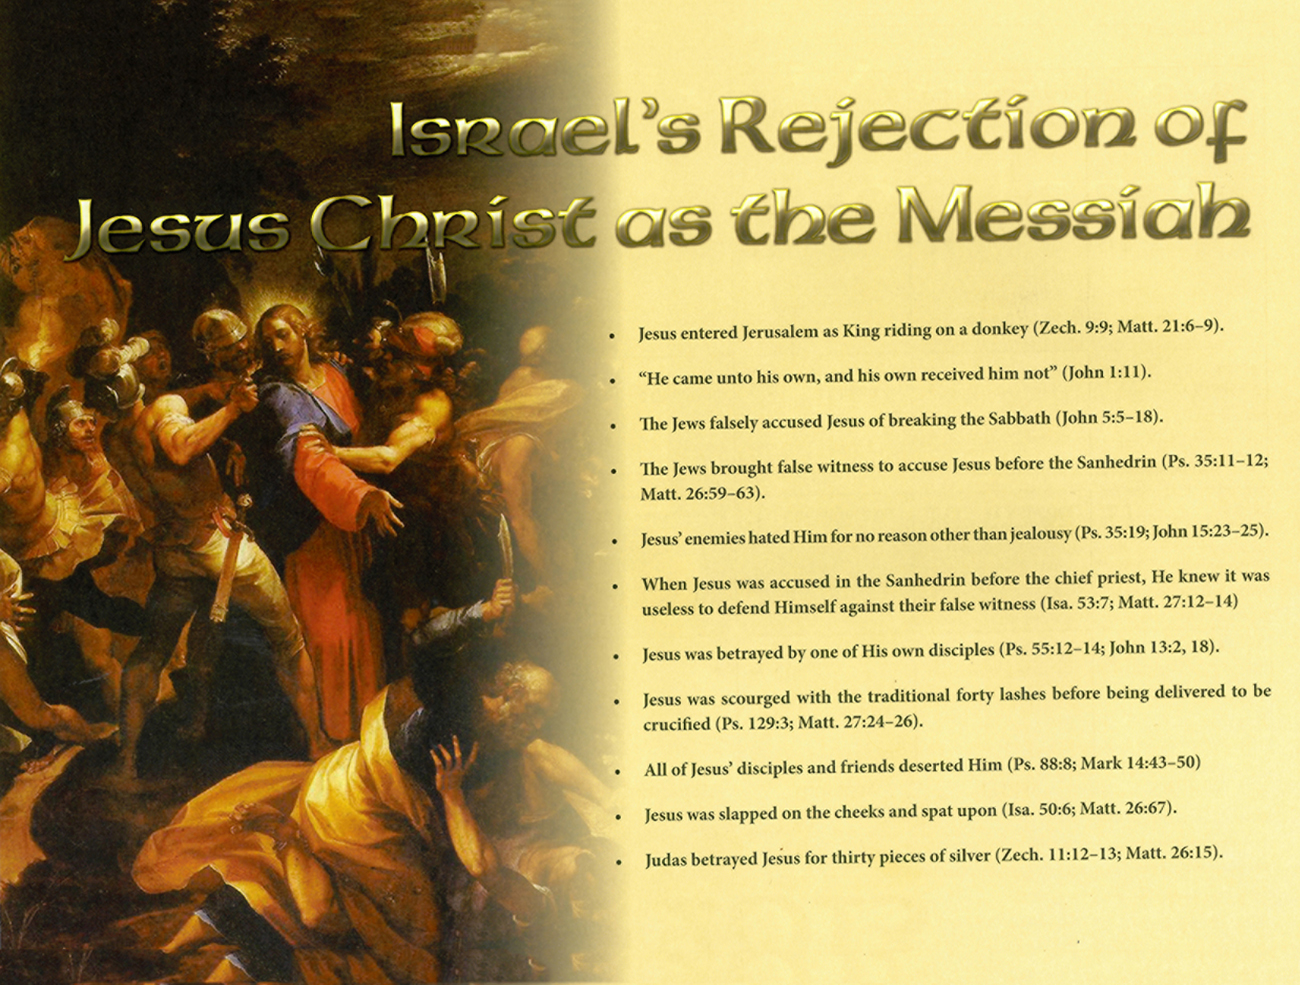 2013 Prophecy Calendar: June - Irrael's Rejection of Jesus Christ as the Messiah